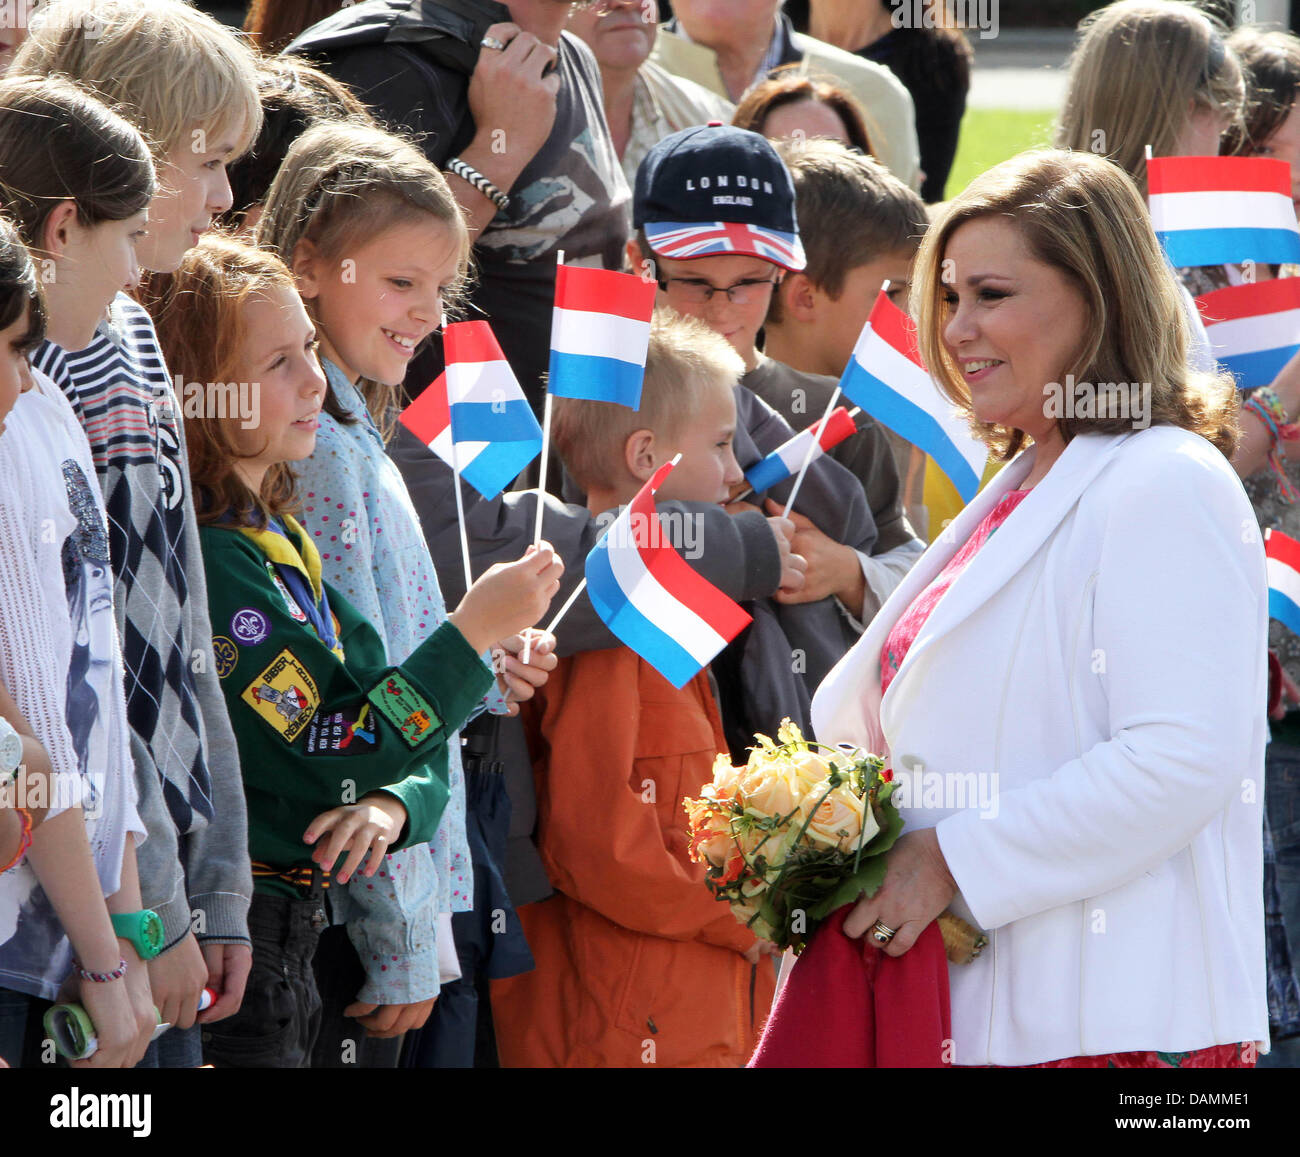 Grand Duchess Maria Teresa of Luxembourg greeting people on a visit to the village Niederanven, 22 June 2011. The Grand Ducal family will attend the celebrations for the National Day of Luxembourg on 23 June 2011. Photo: Albert van der Werf (NETHERLANDS OUT) Stock Photo